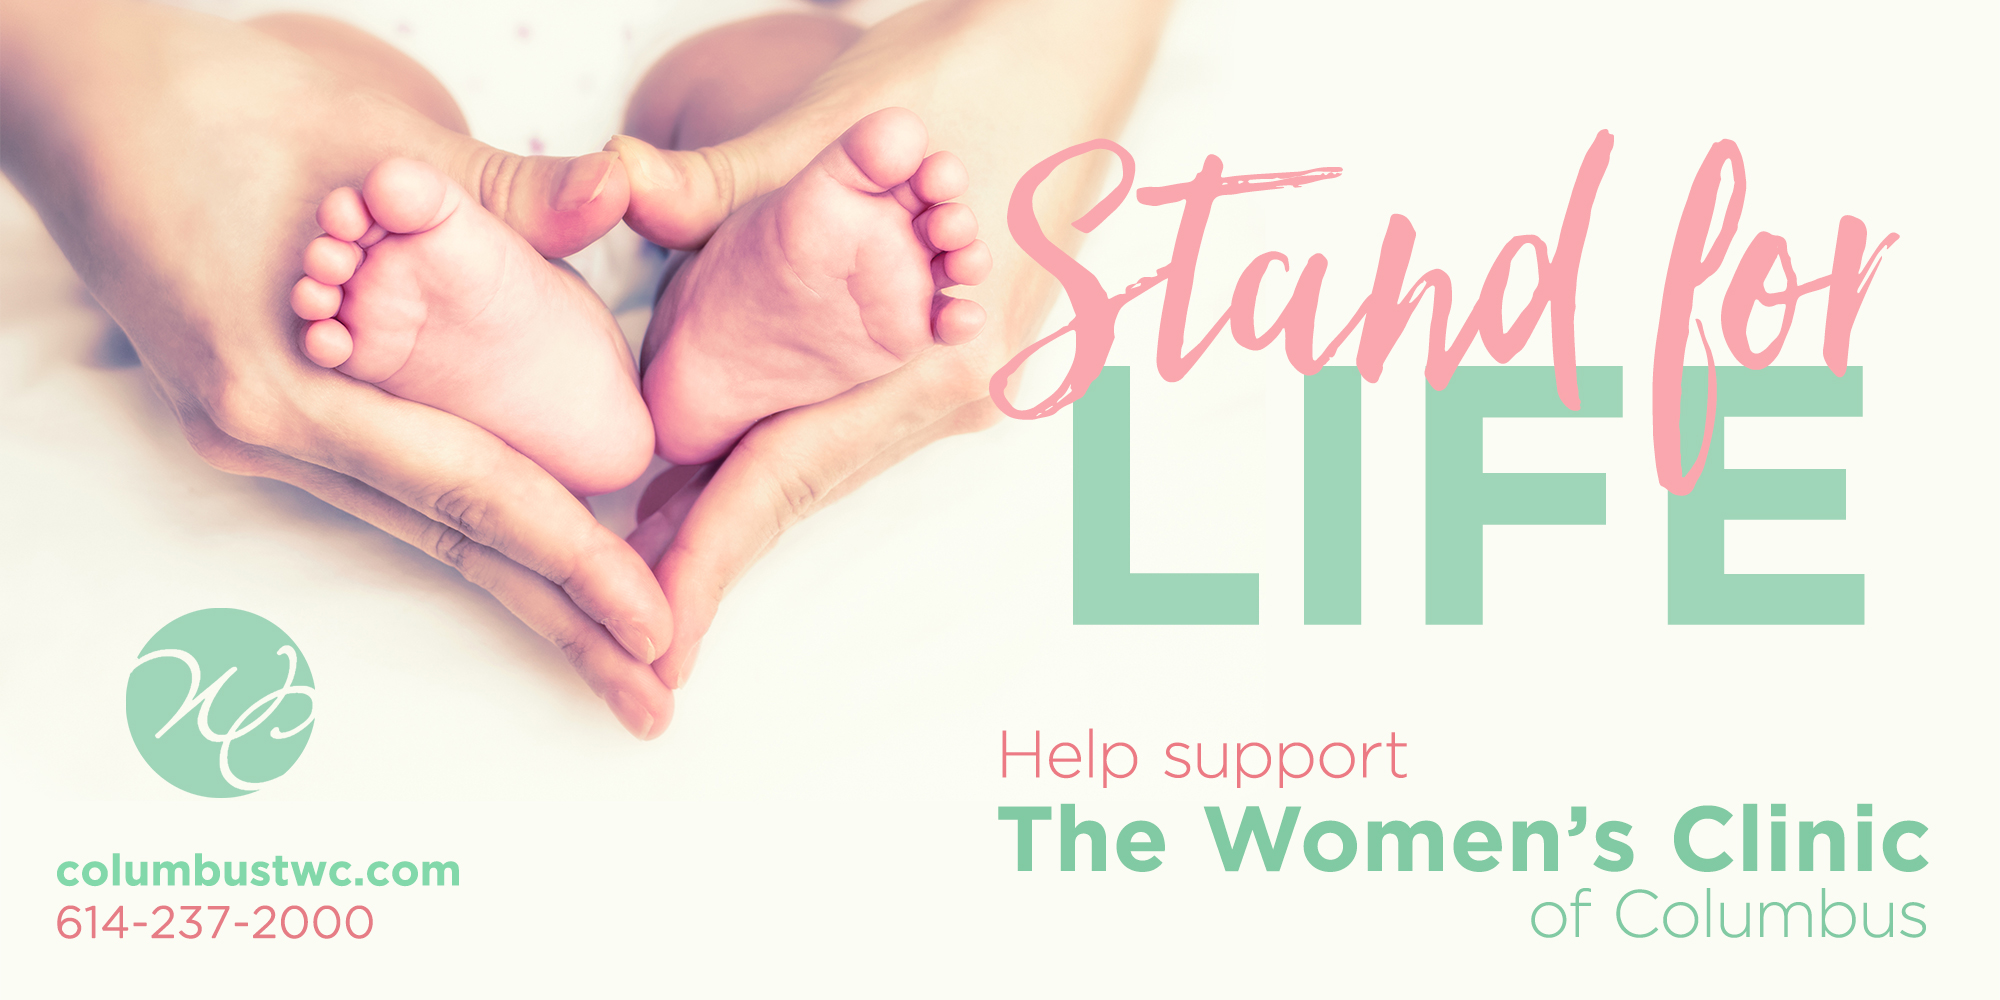 Stand for Life help support The Women's Clinic of Columbus